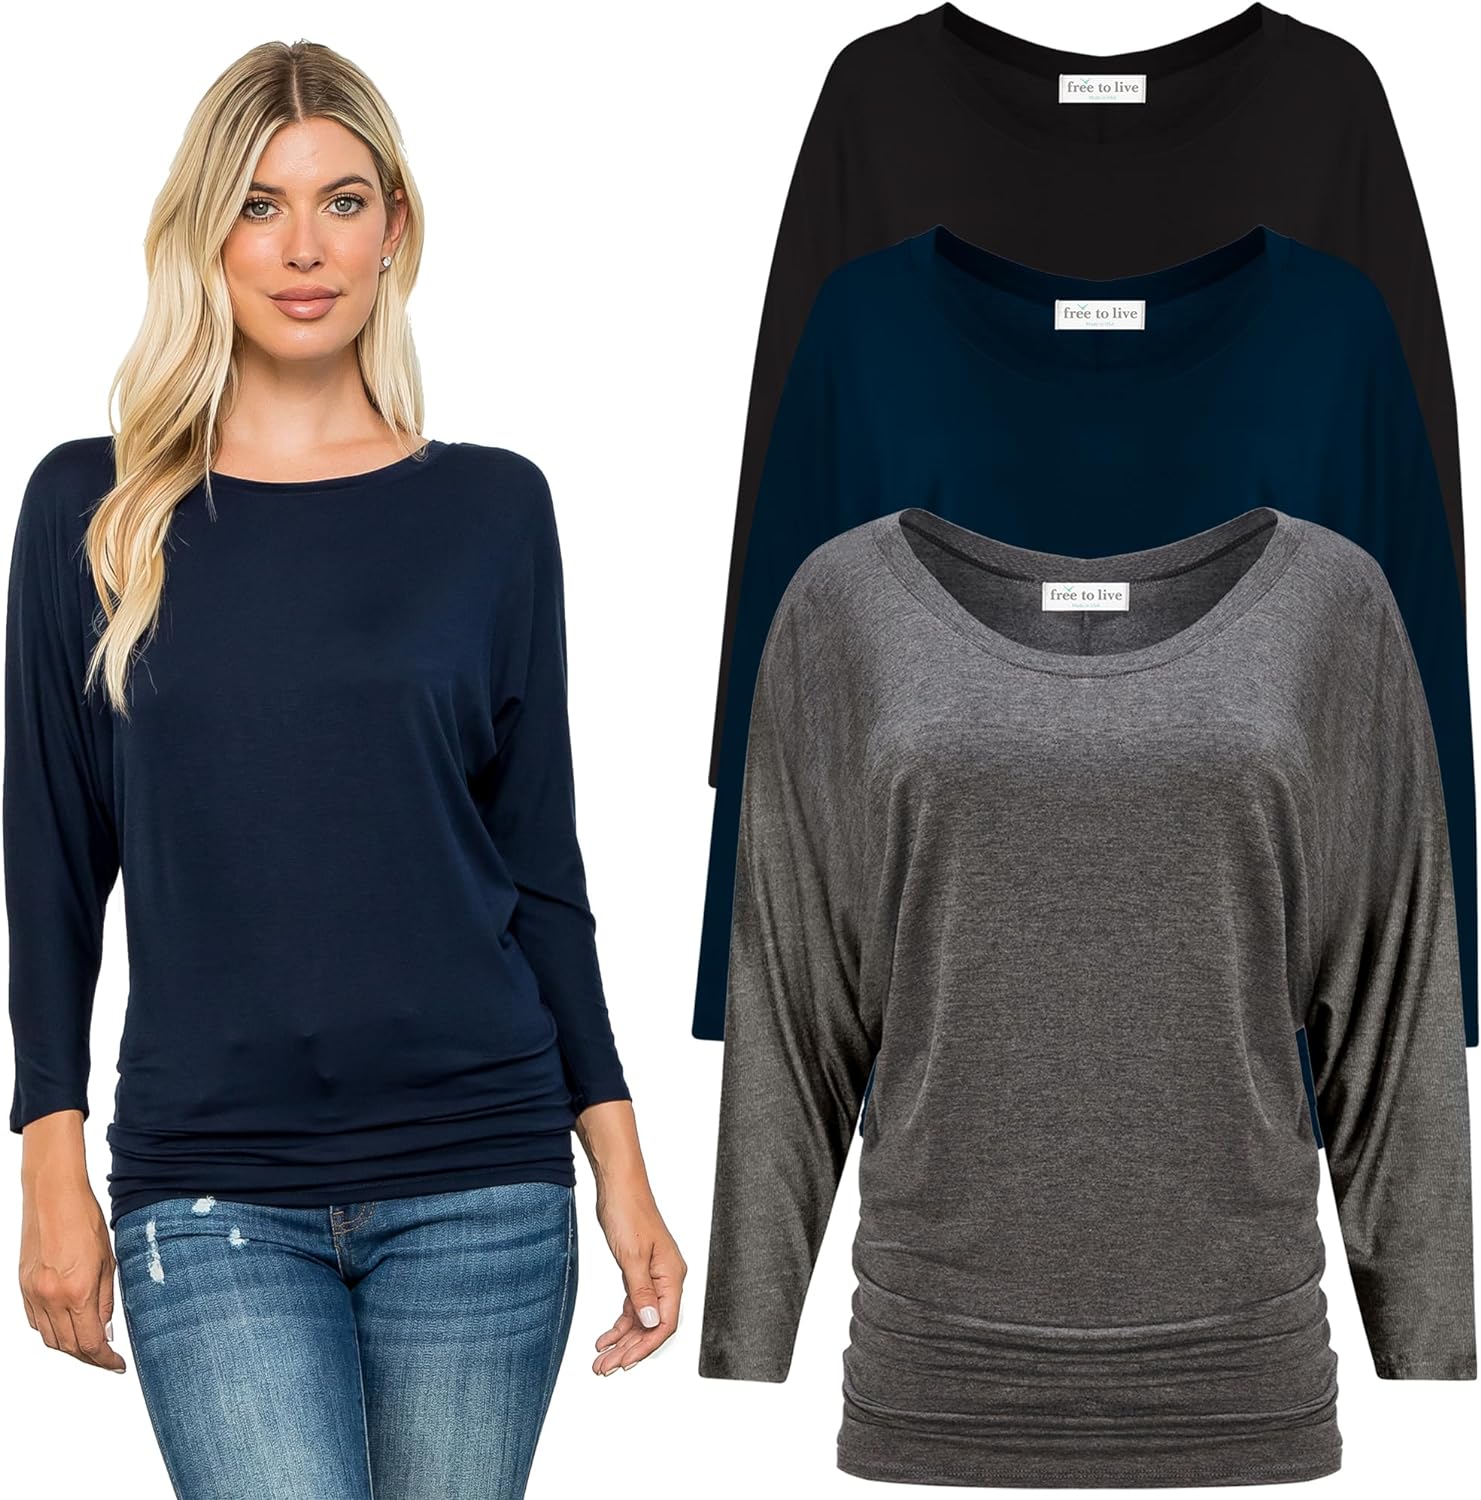 Free to Live 3 Pack Dolman 3/4 Sleeve Business Casual Tops for